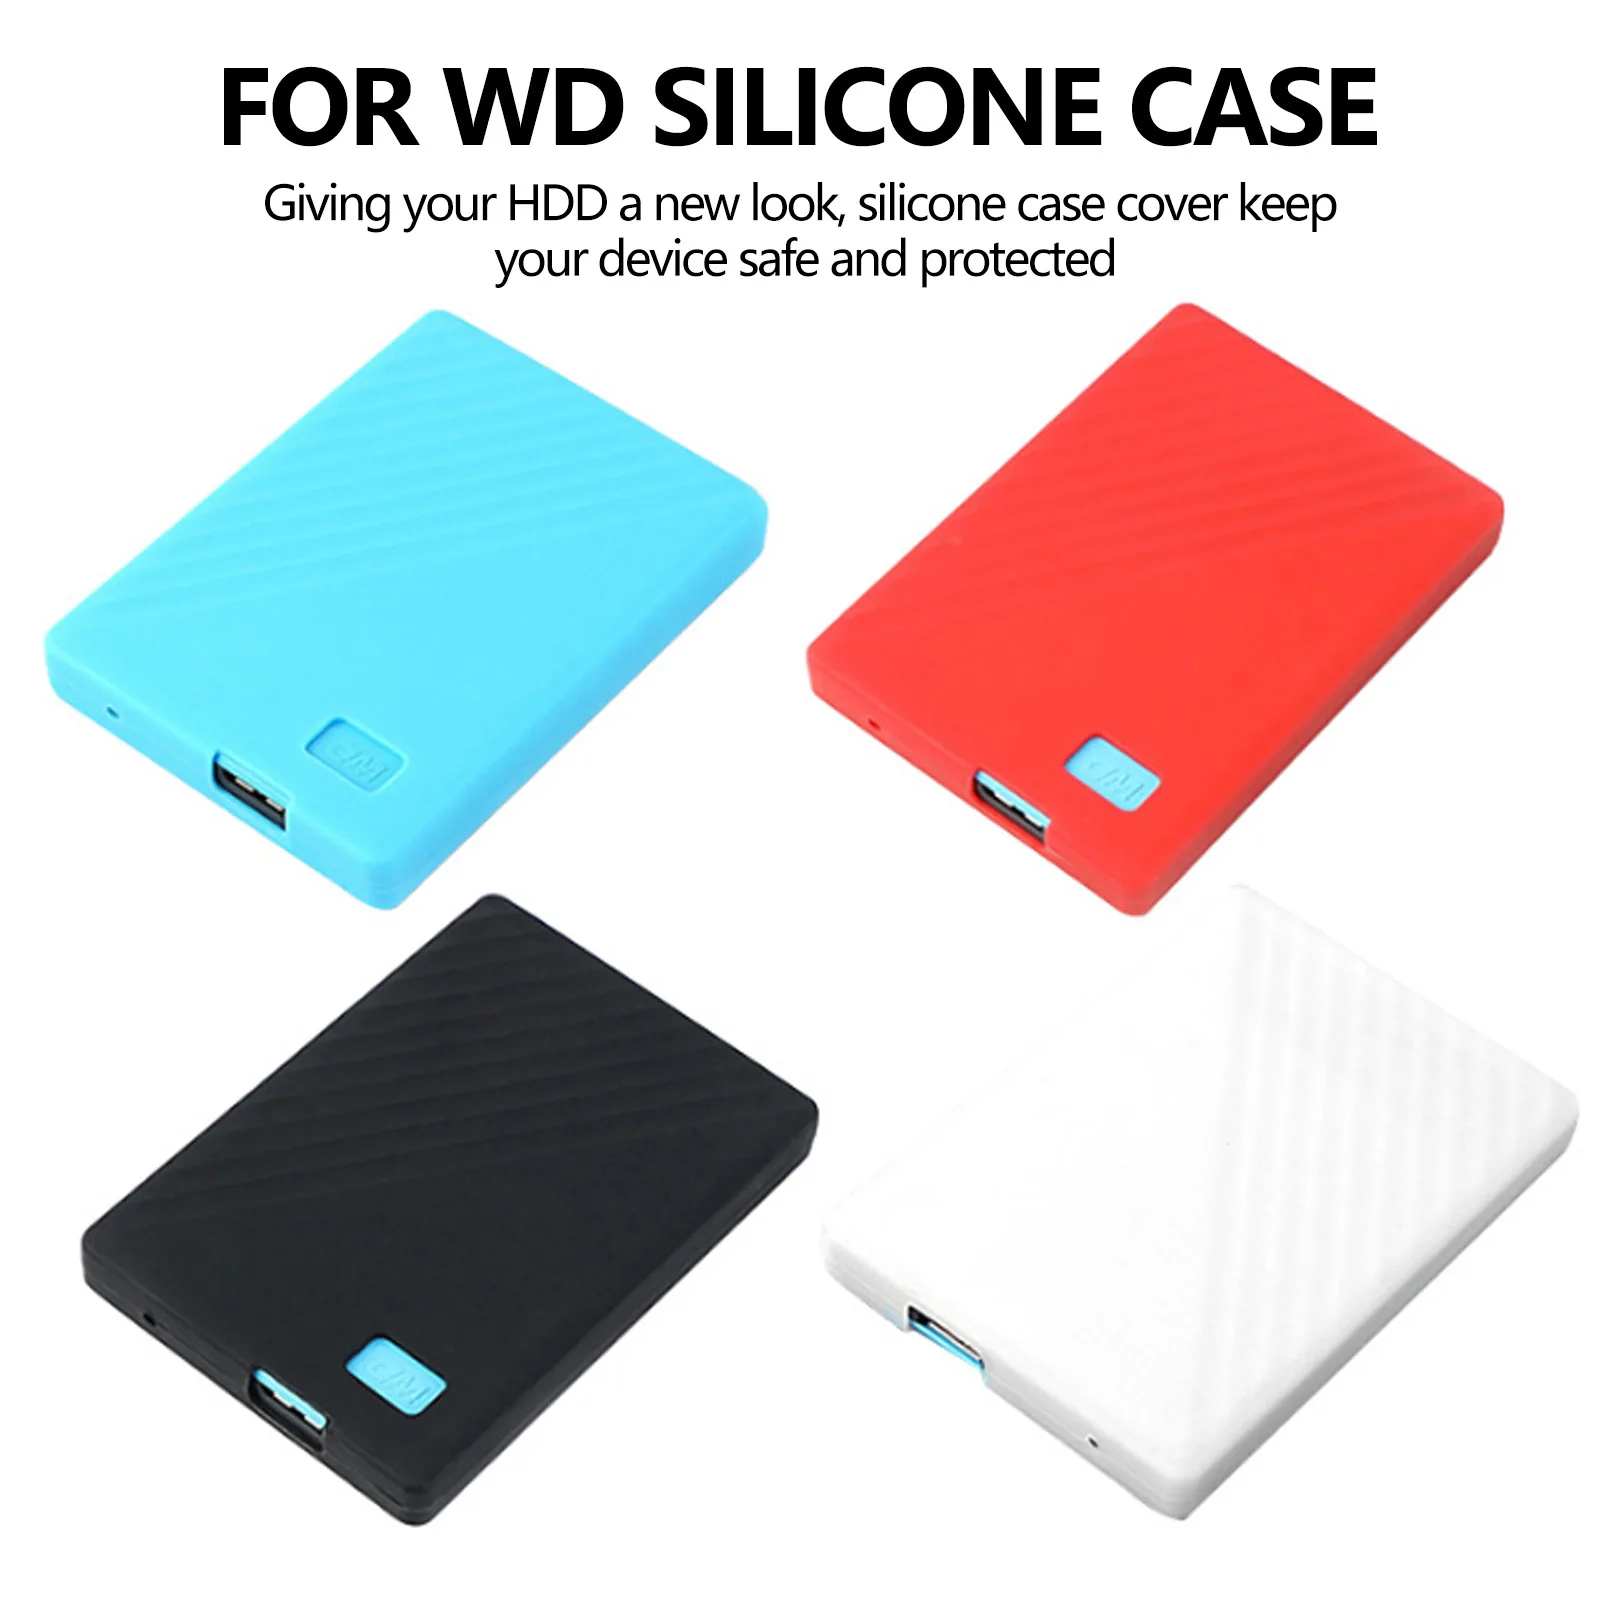 Bevigac Silicone HDD Case Bag Protective Hard Drive Disk Cover Sleeve Protector Skin for WD Western Digital My Passport 1T 2T